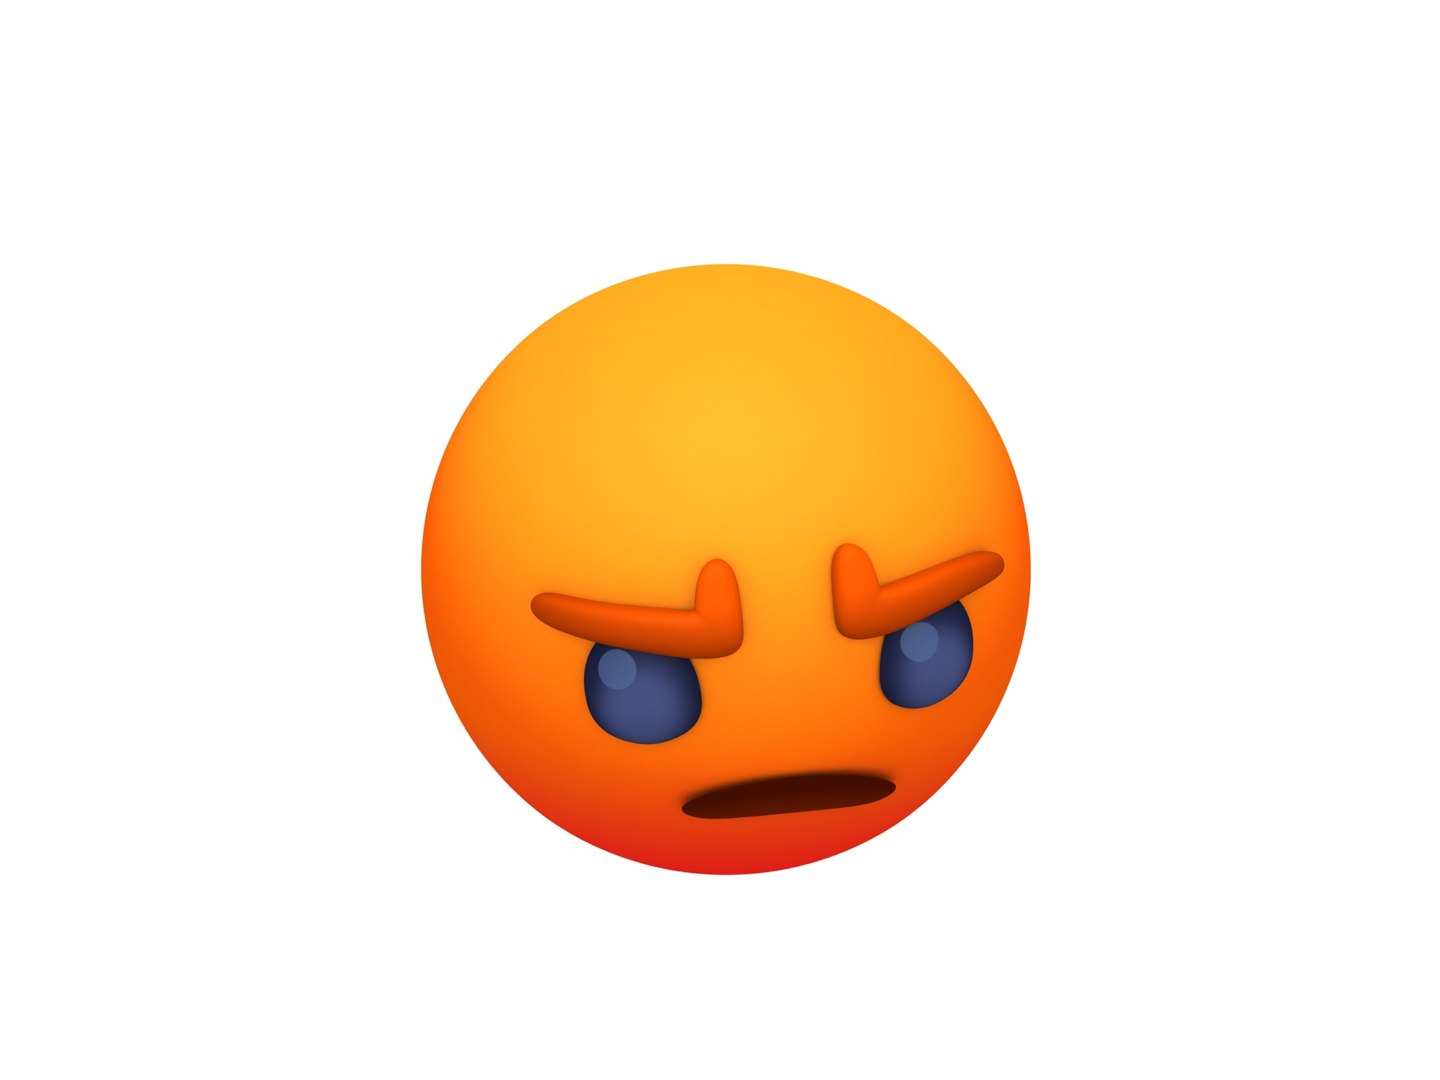 facebook angry faces